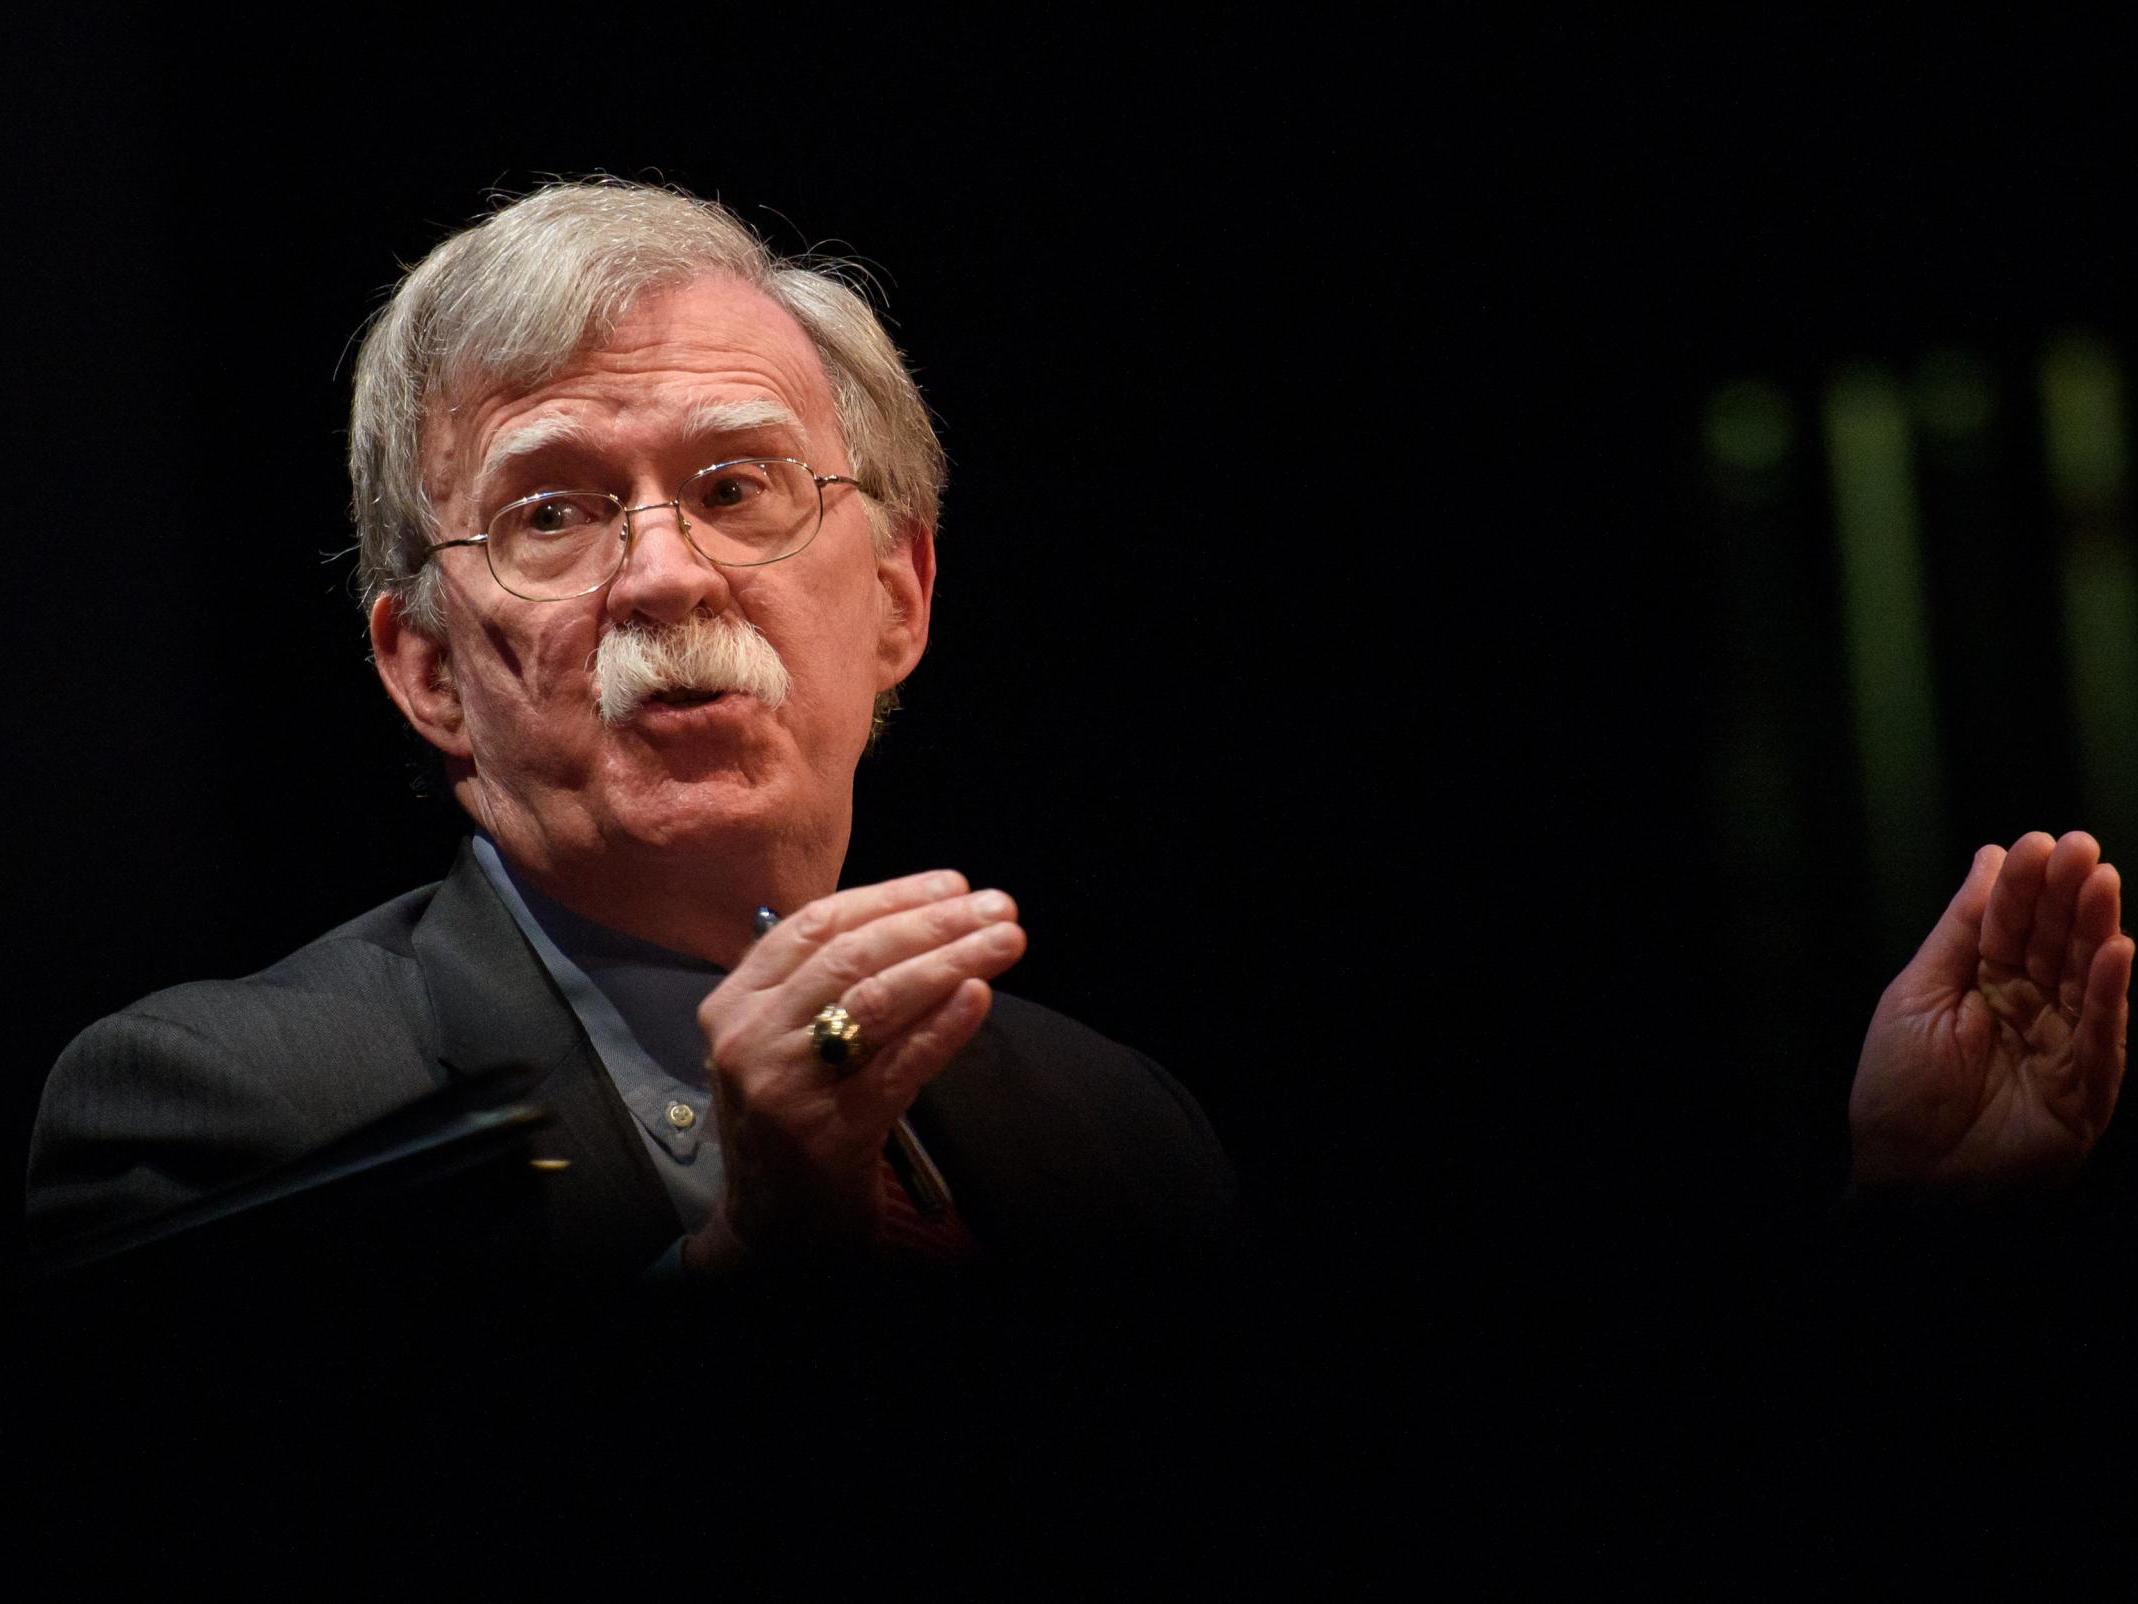 Bolton was a surprise addition to Trump's inner circle and a controversial departure